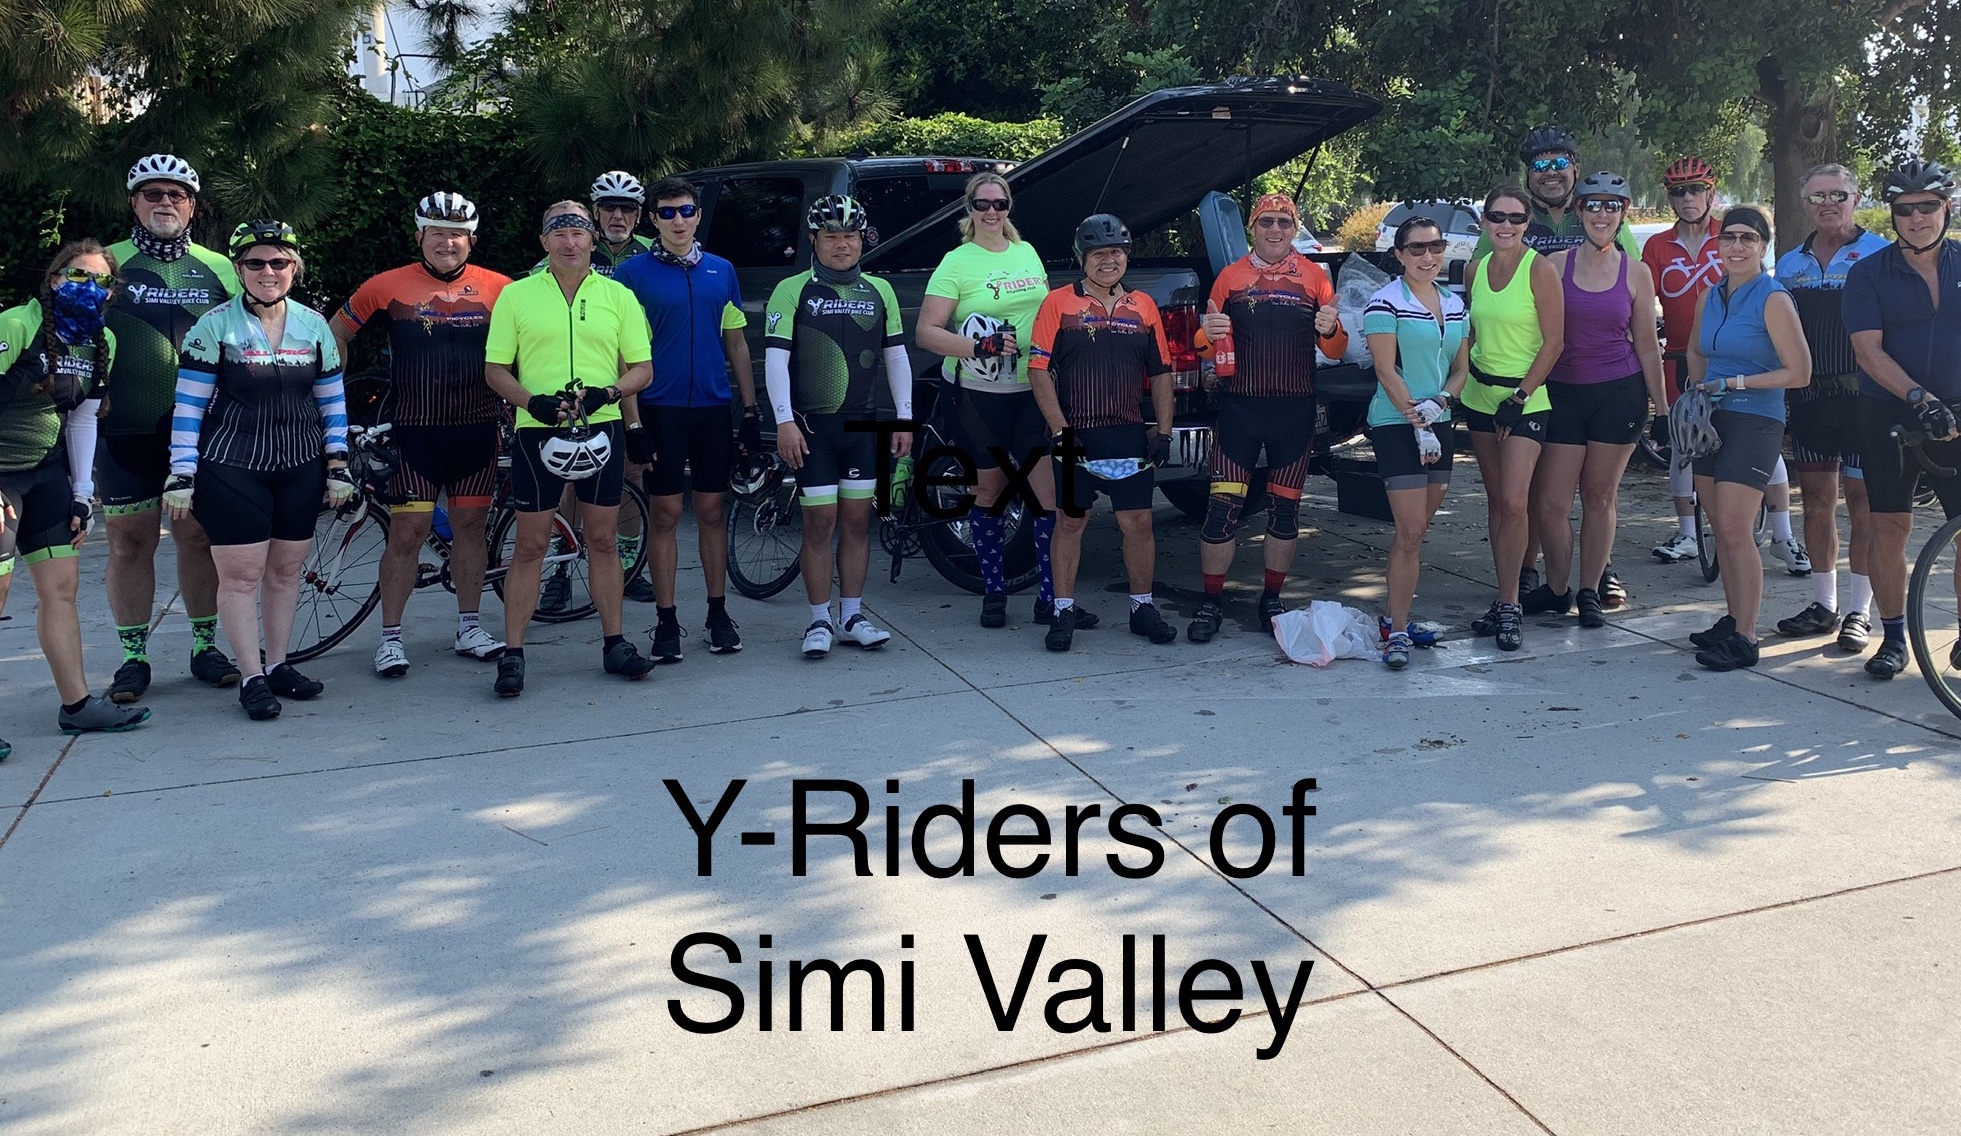 Becky Buck with Y-Riders of Simi Valley